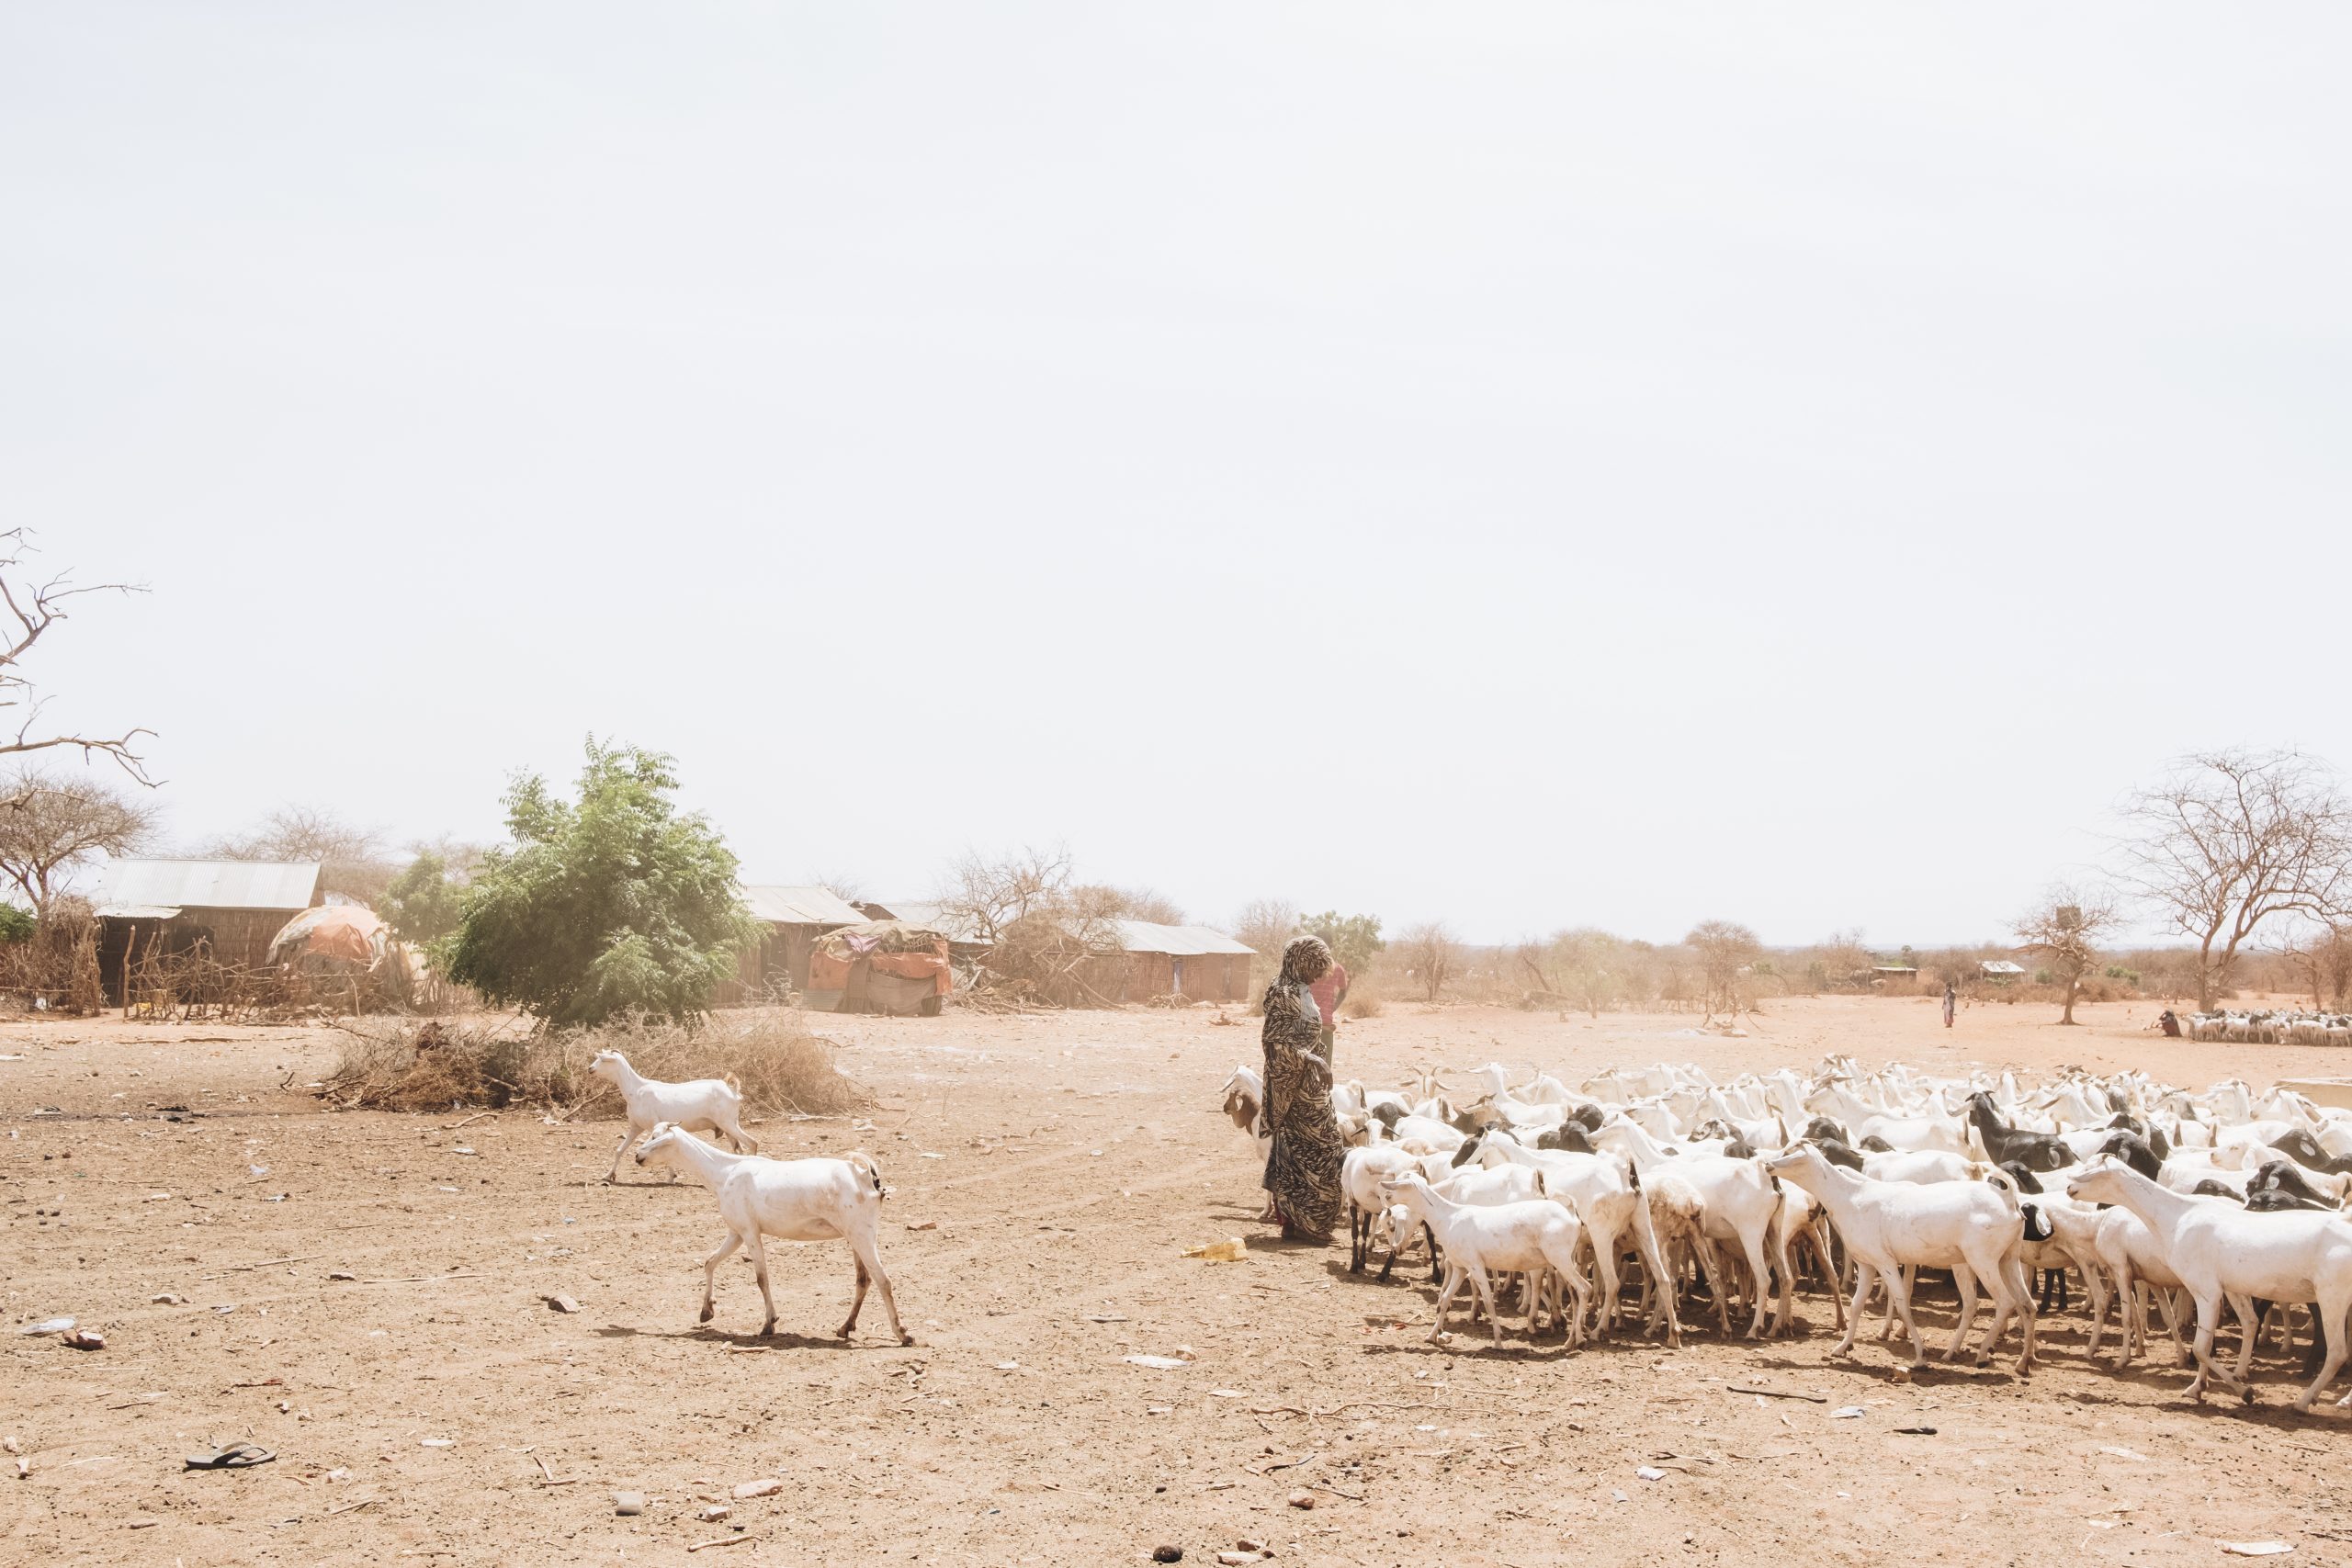 Pastoralists with goats. 

For extra quotes see trip report - search '341639' or scroll to bottom to view related resources and click through.